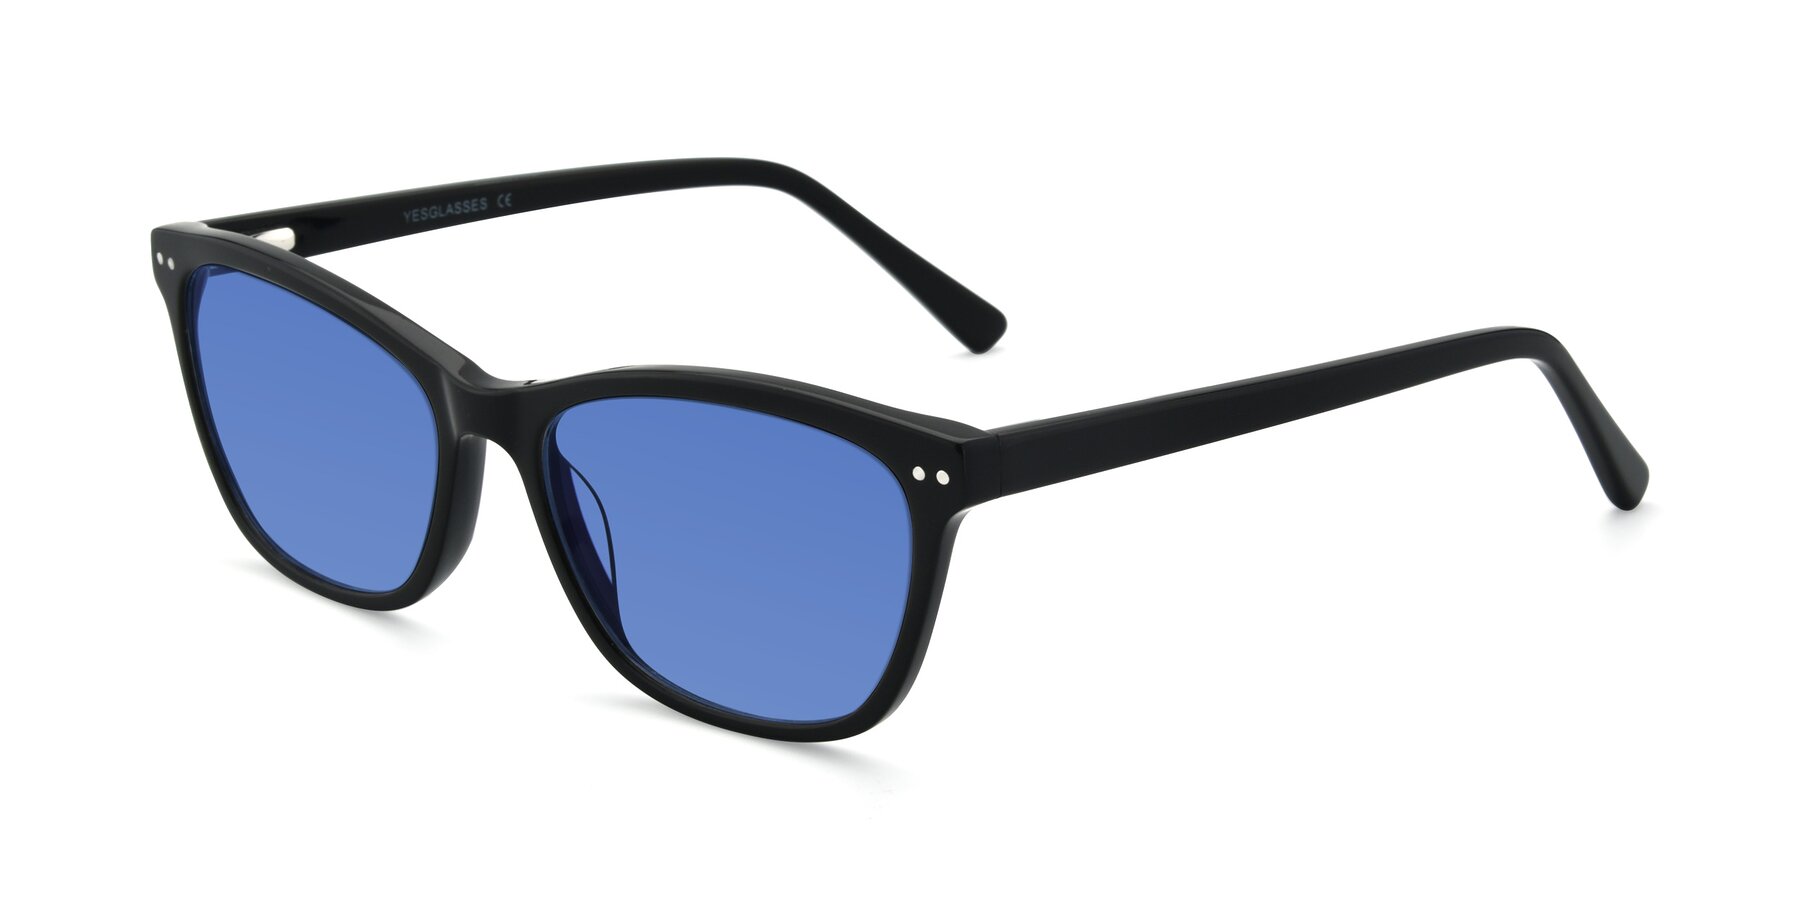 Angle of 17350 in Black with Blue Tinted Lenses